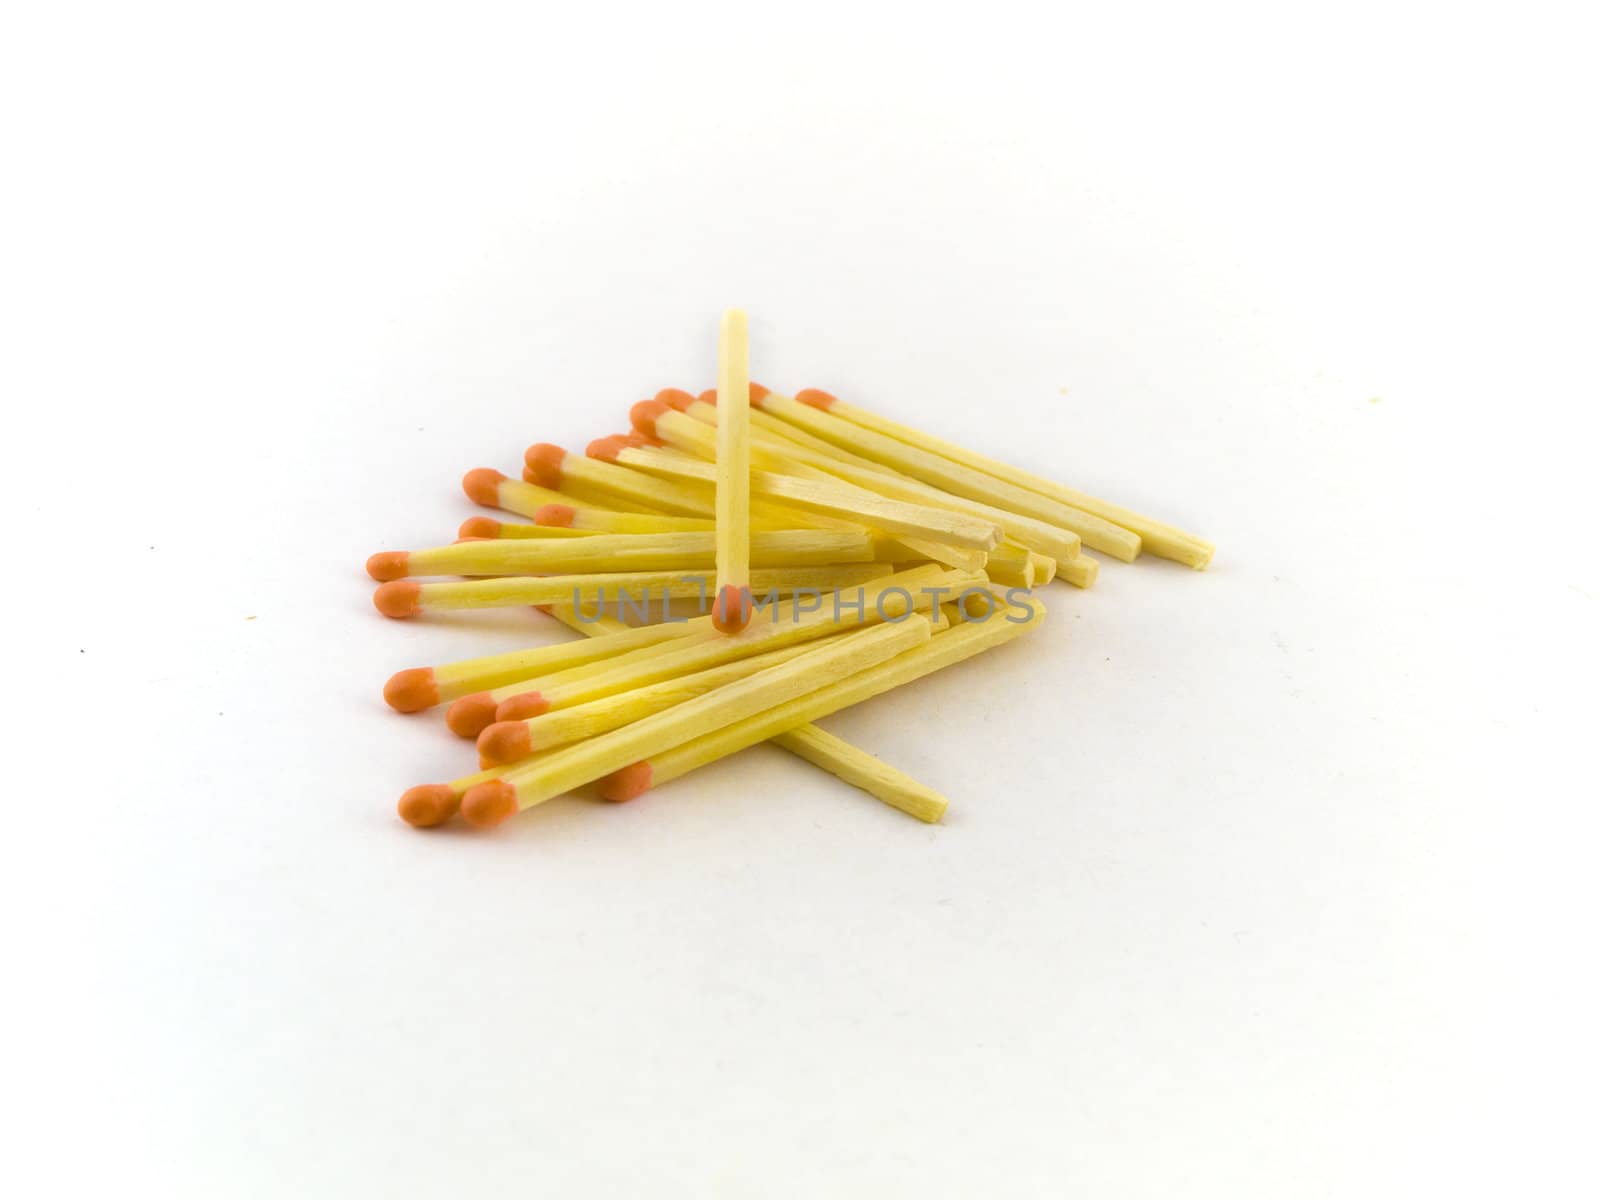 Matches on White Background by bobbigmac